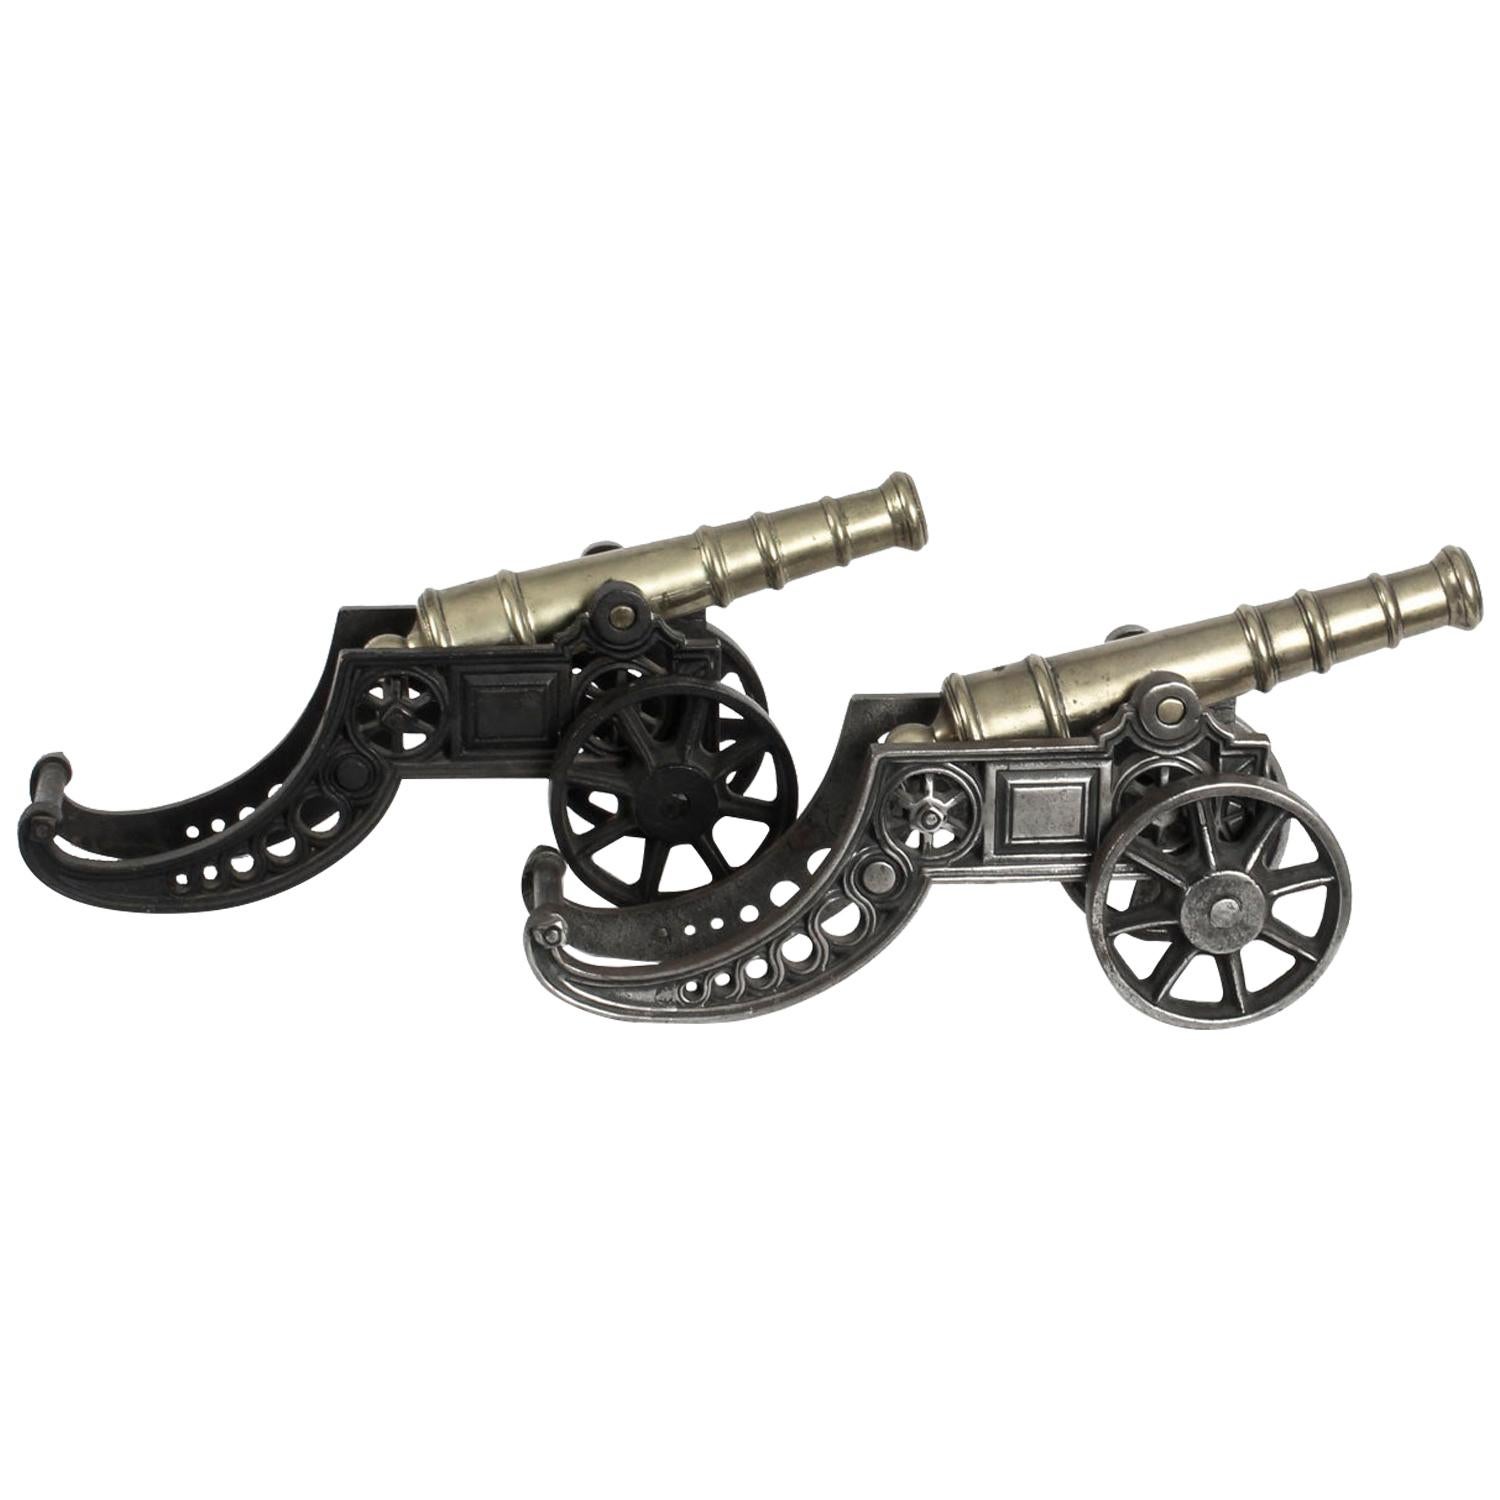 Antique Pair of Brass and Steel Signal Cannons, 19th Century